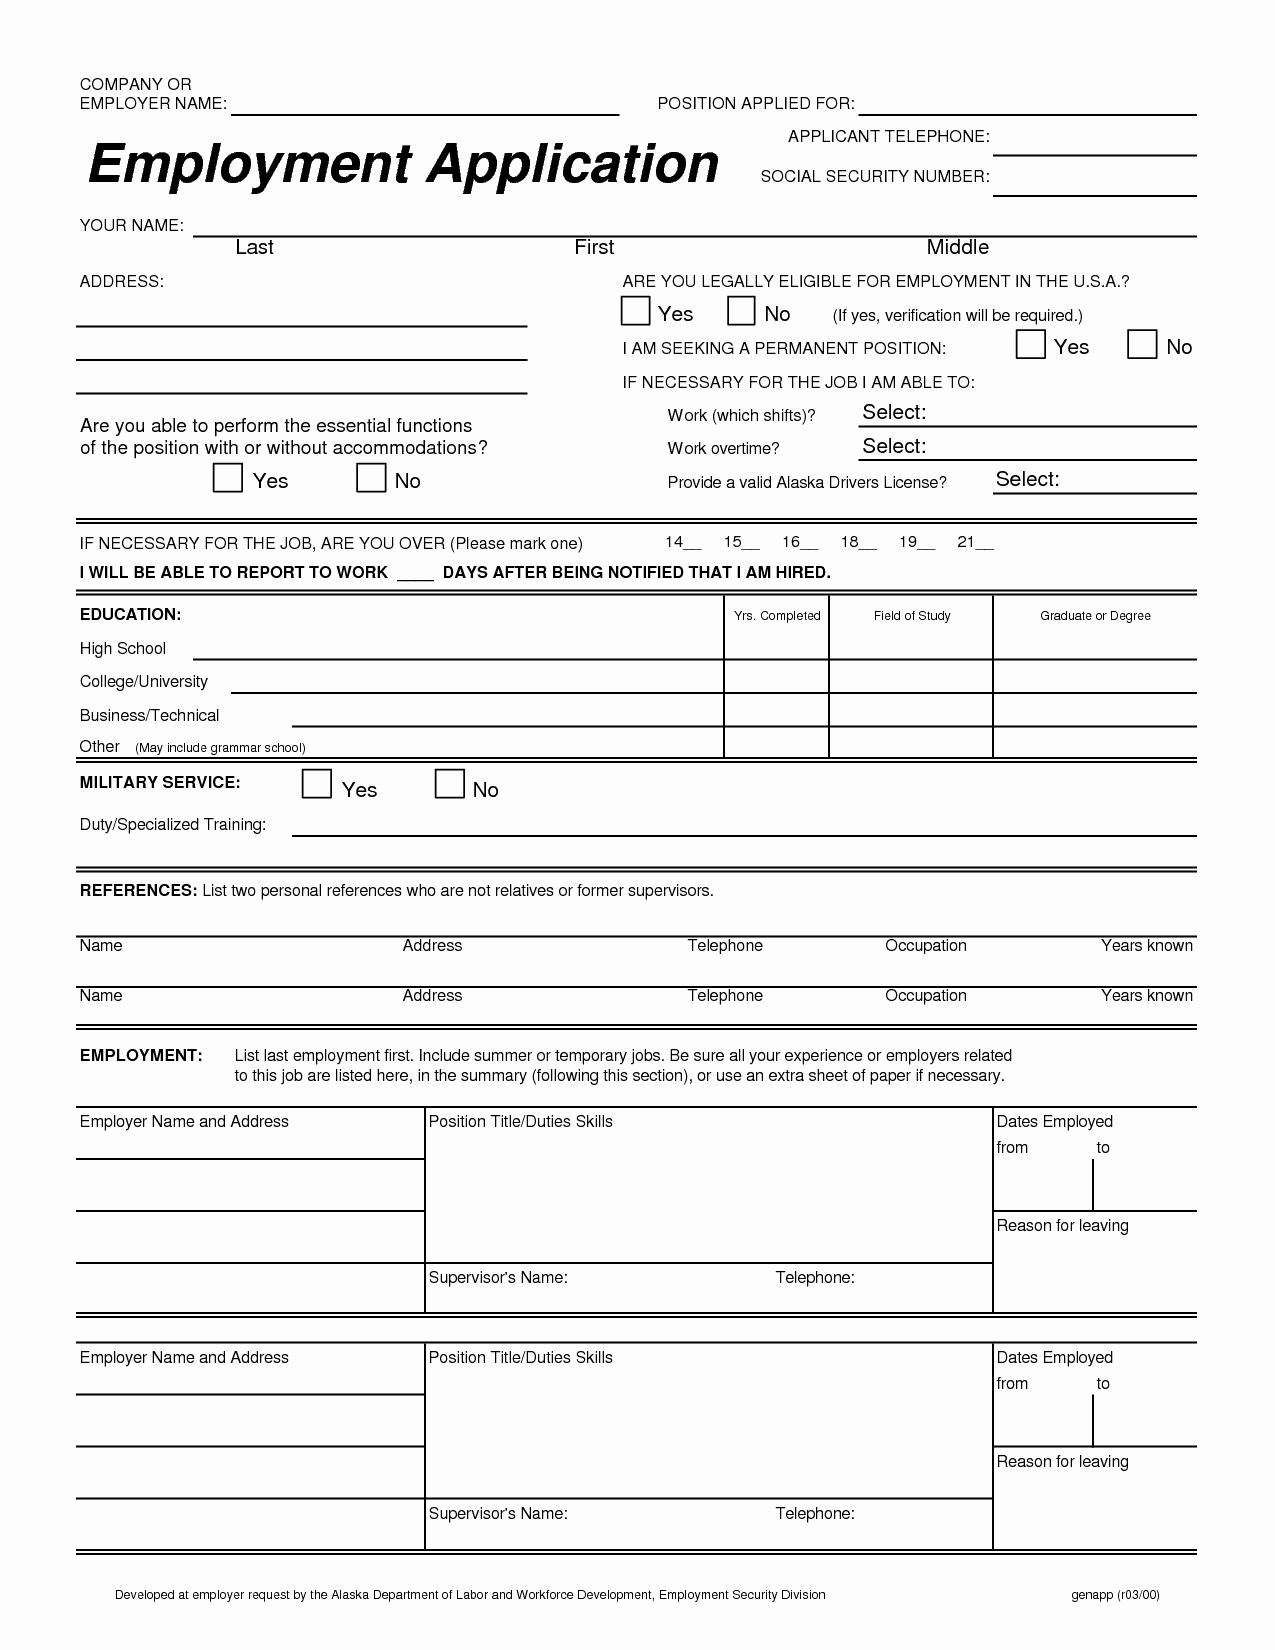 Generic Application for Employment Free Lovely 8 Best Of Generic Job Application Printable form